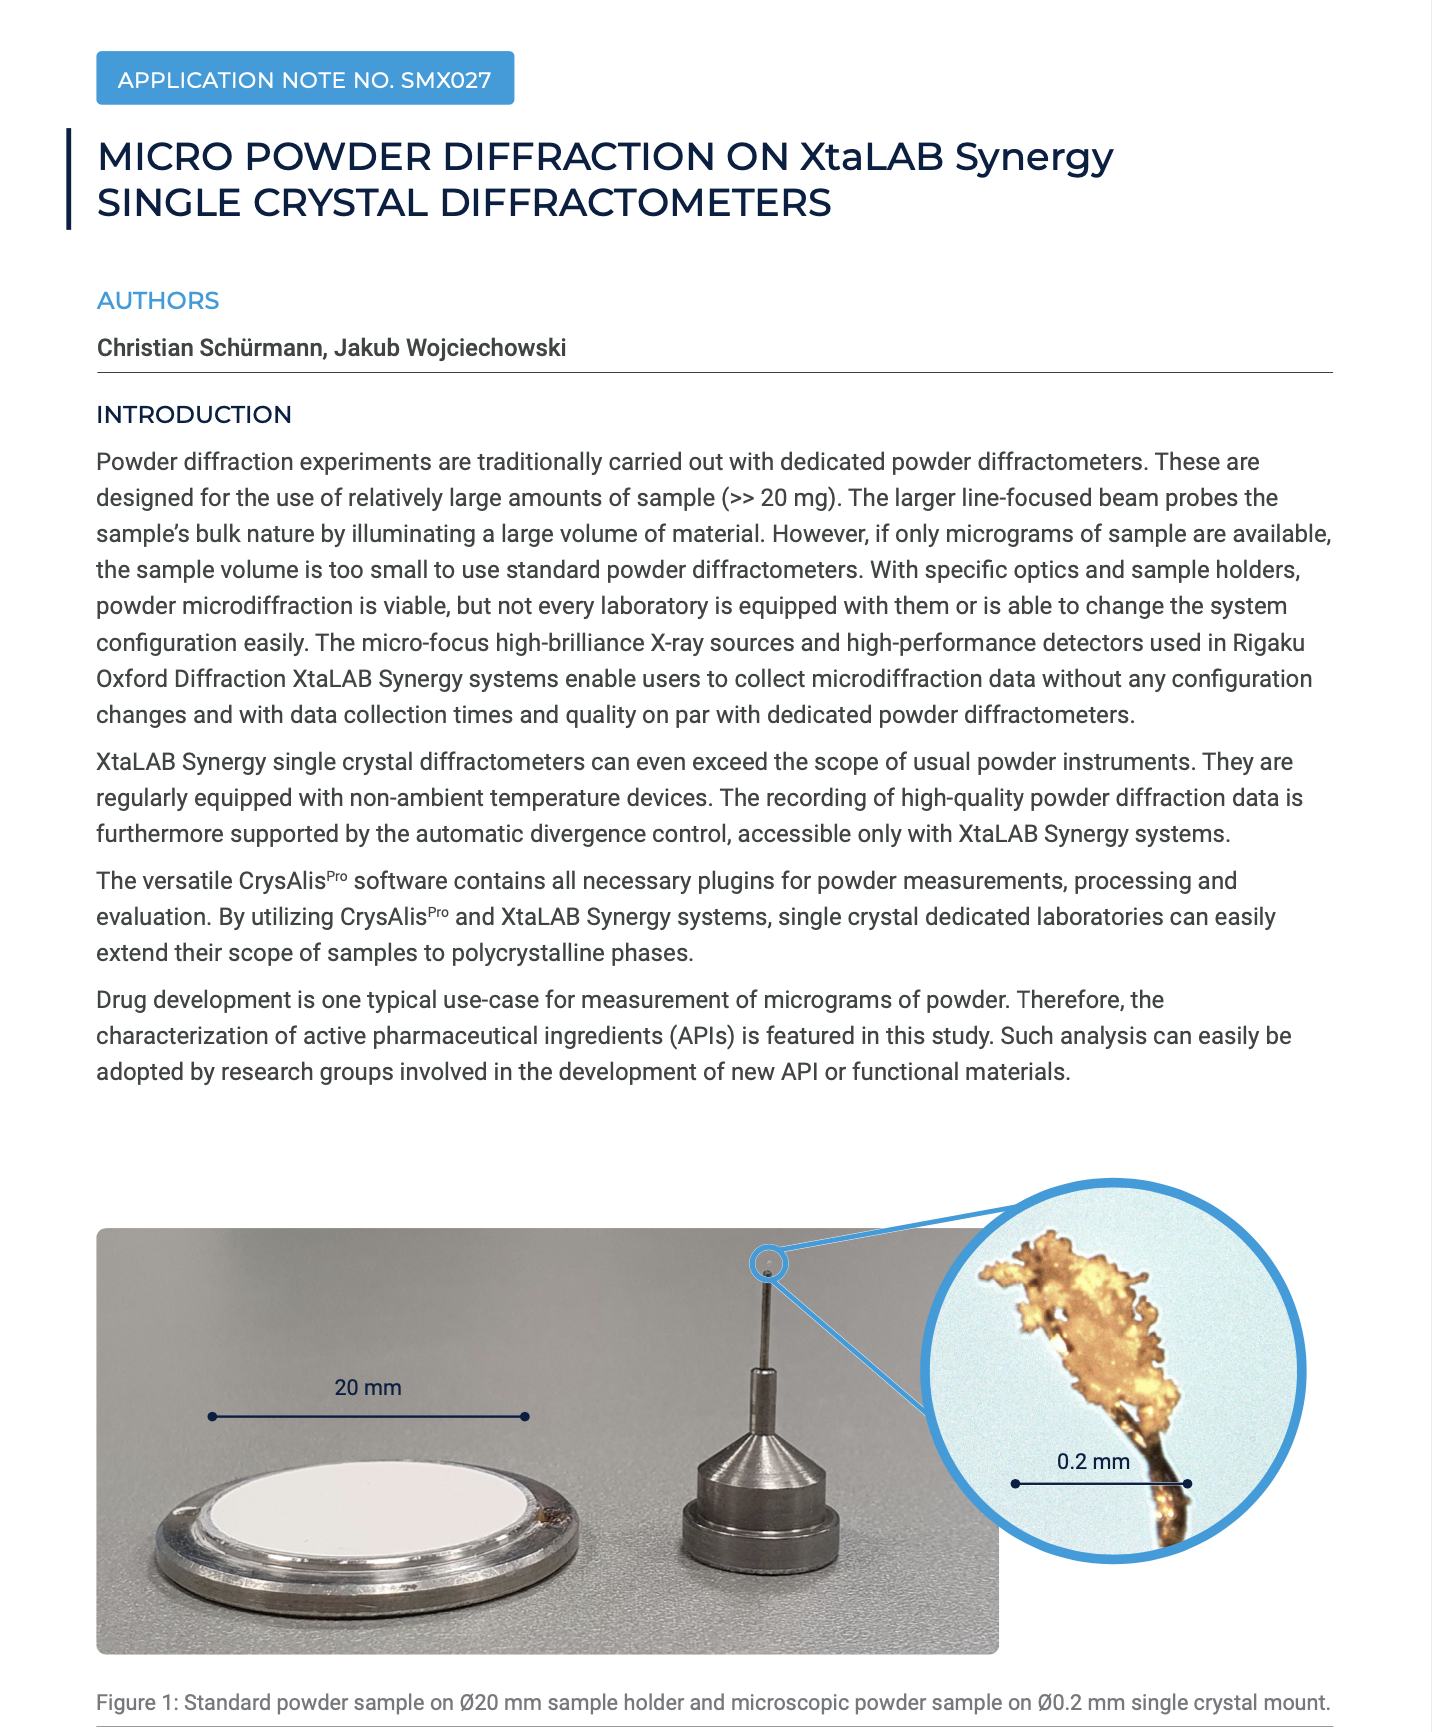 Micro Powder Diffraction on XtaLAB Synergy Single Crystal Diffractometers